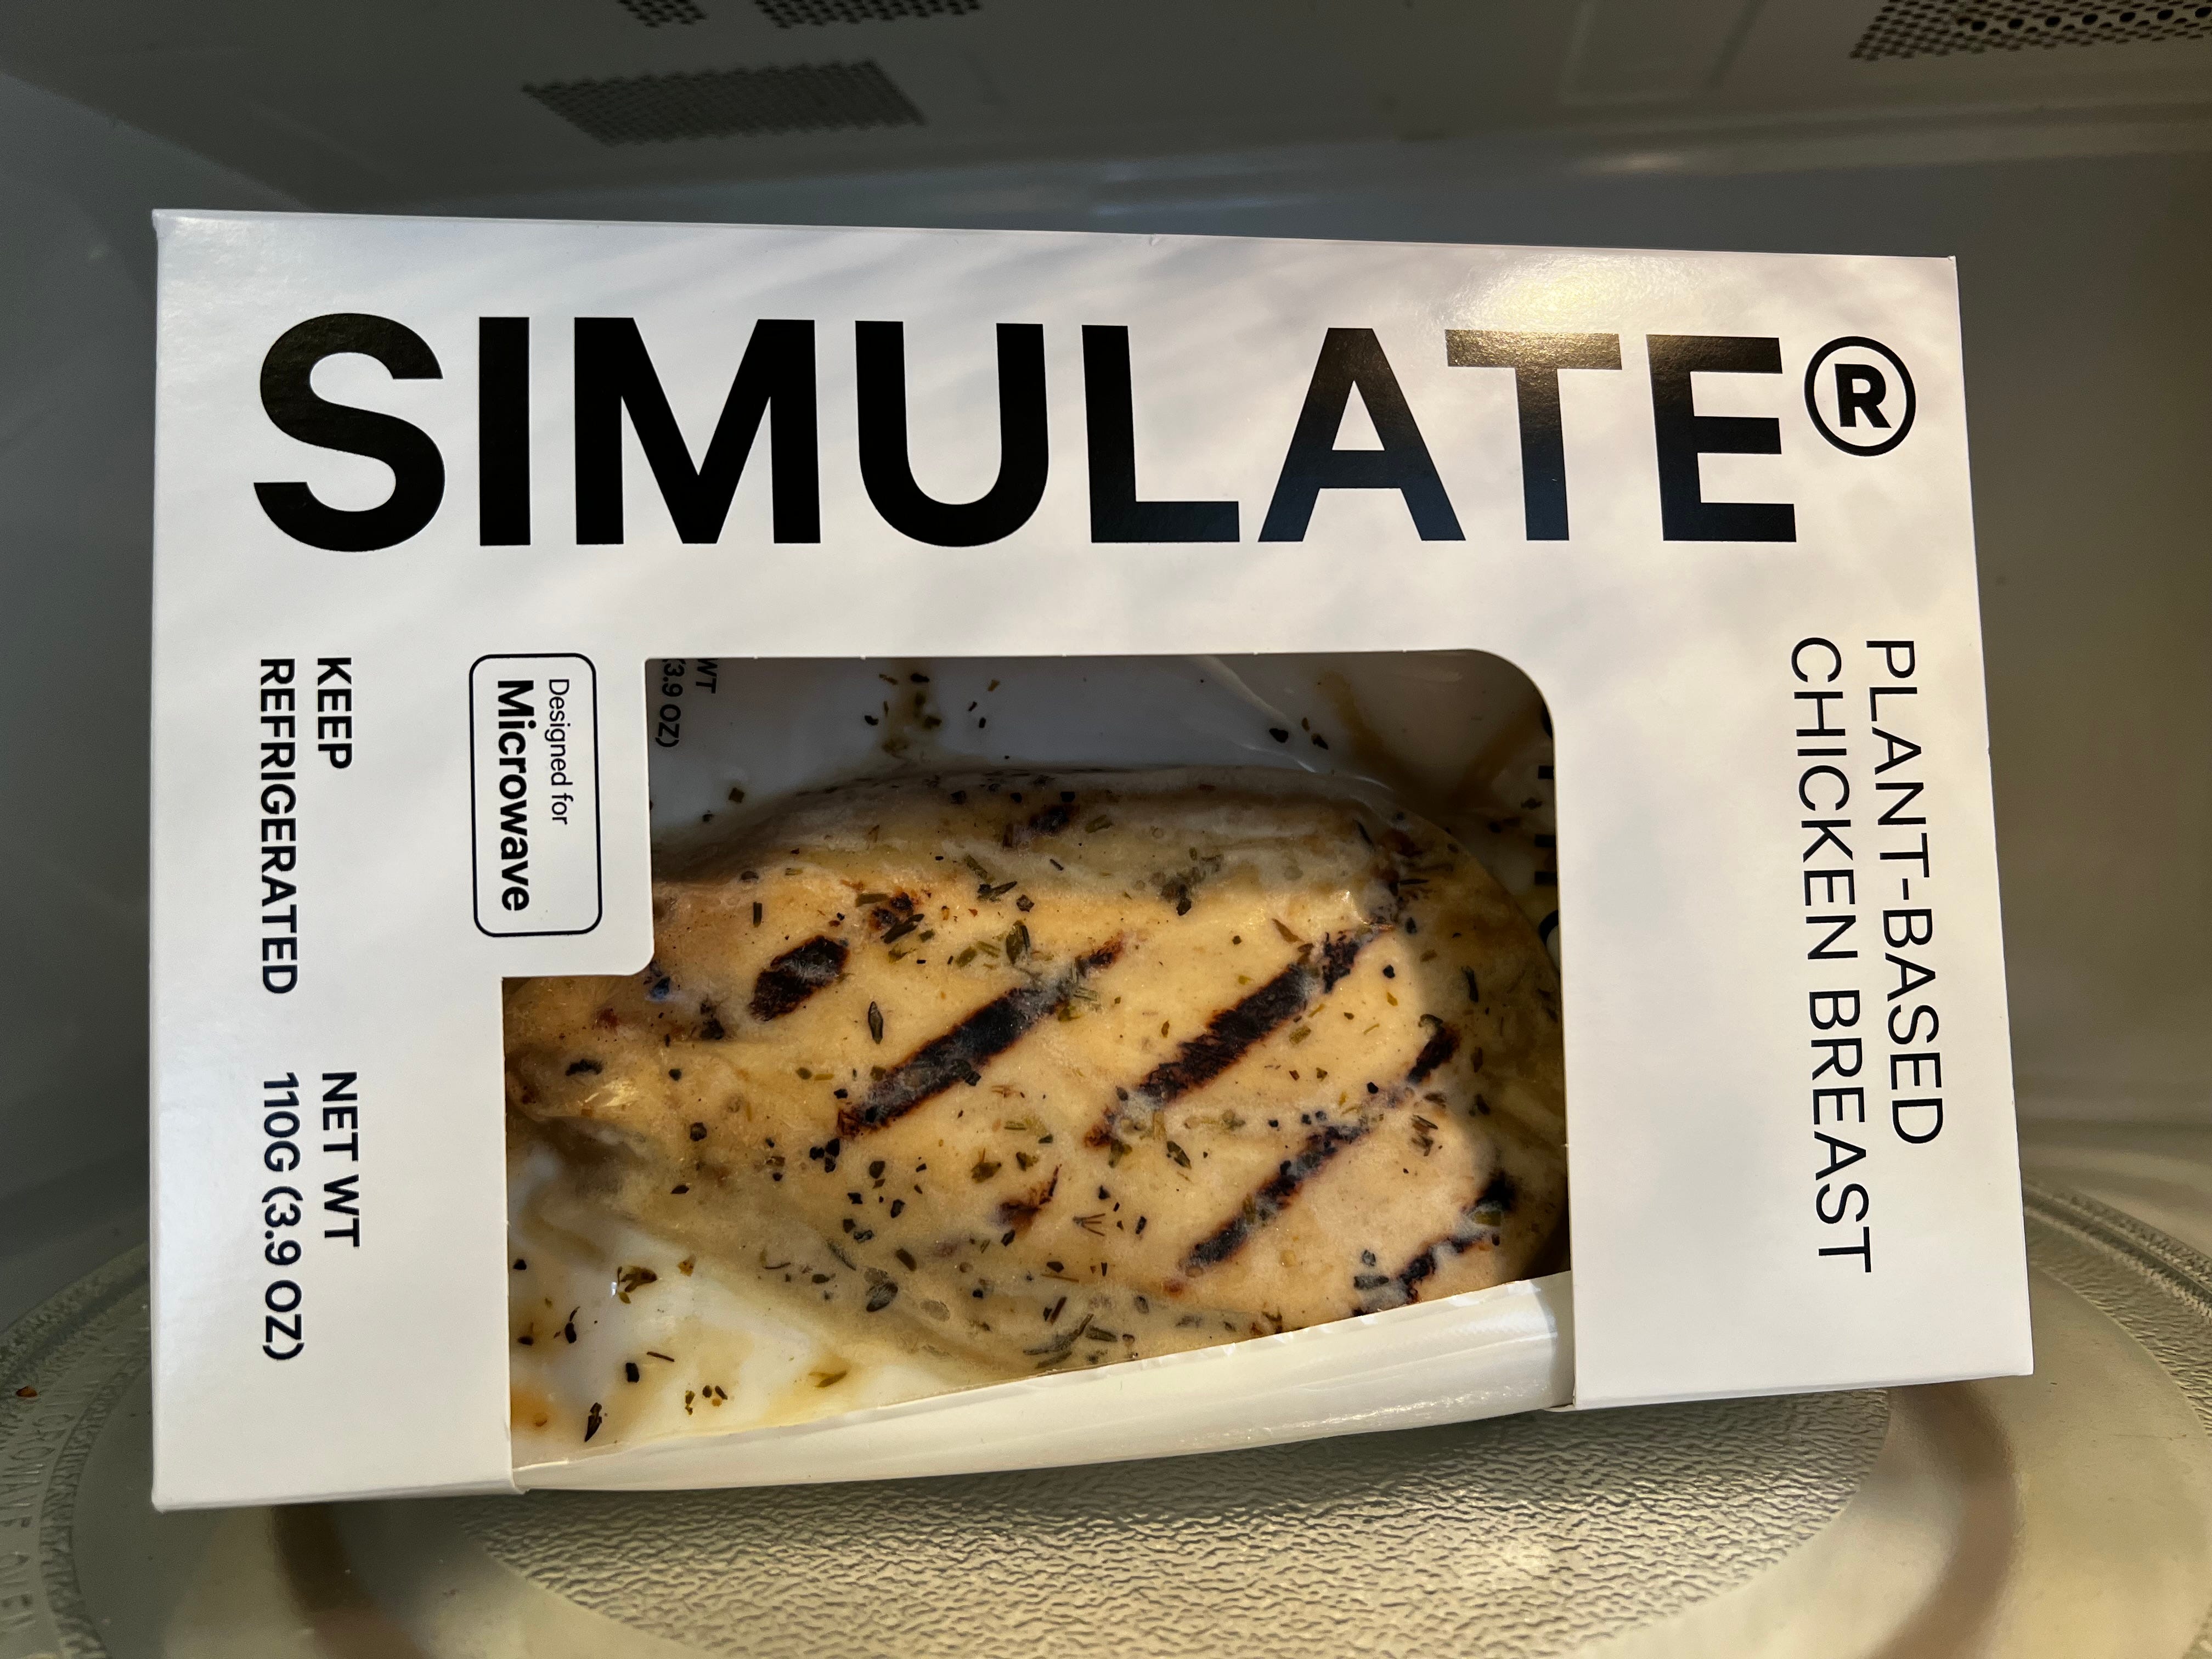 A store-bought Simulate Chicken Breast still in its packaging.